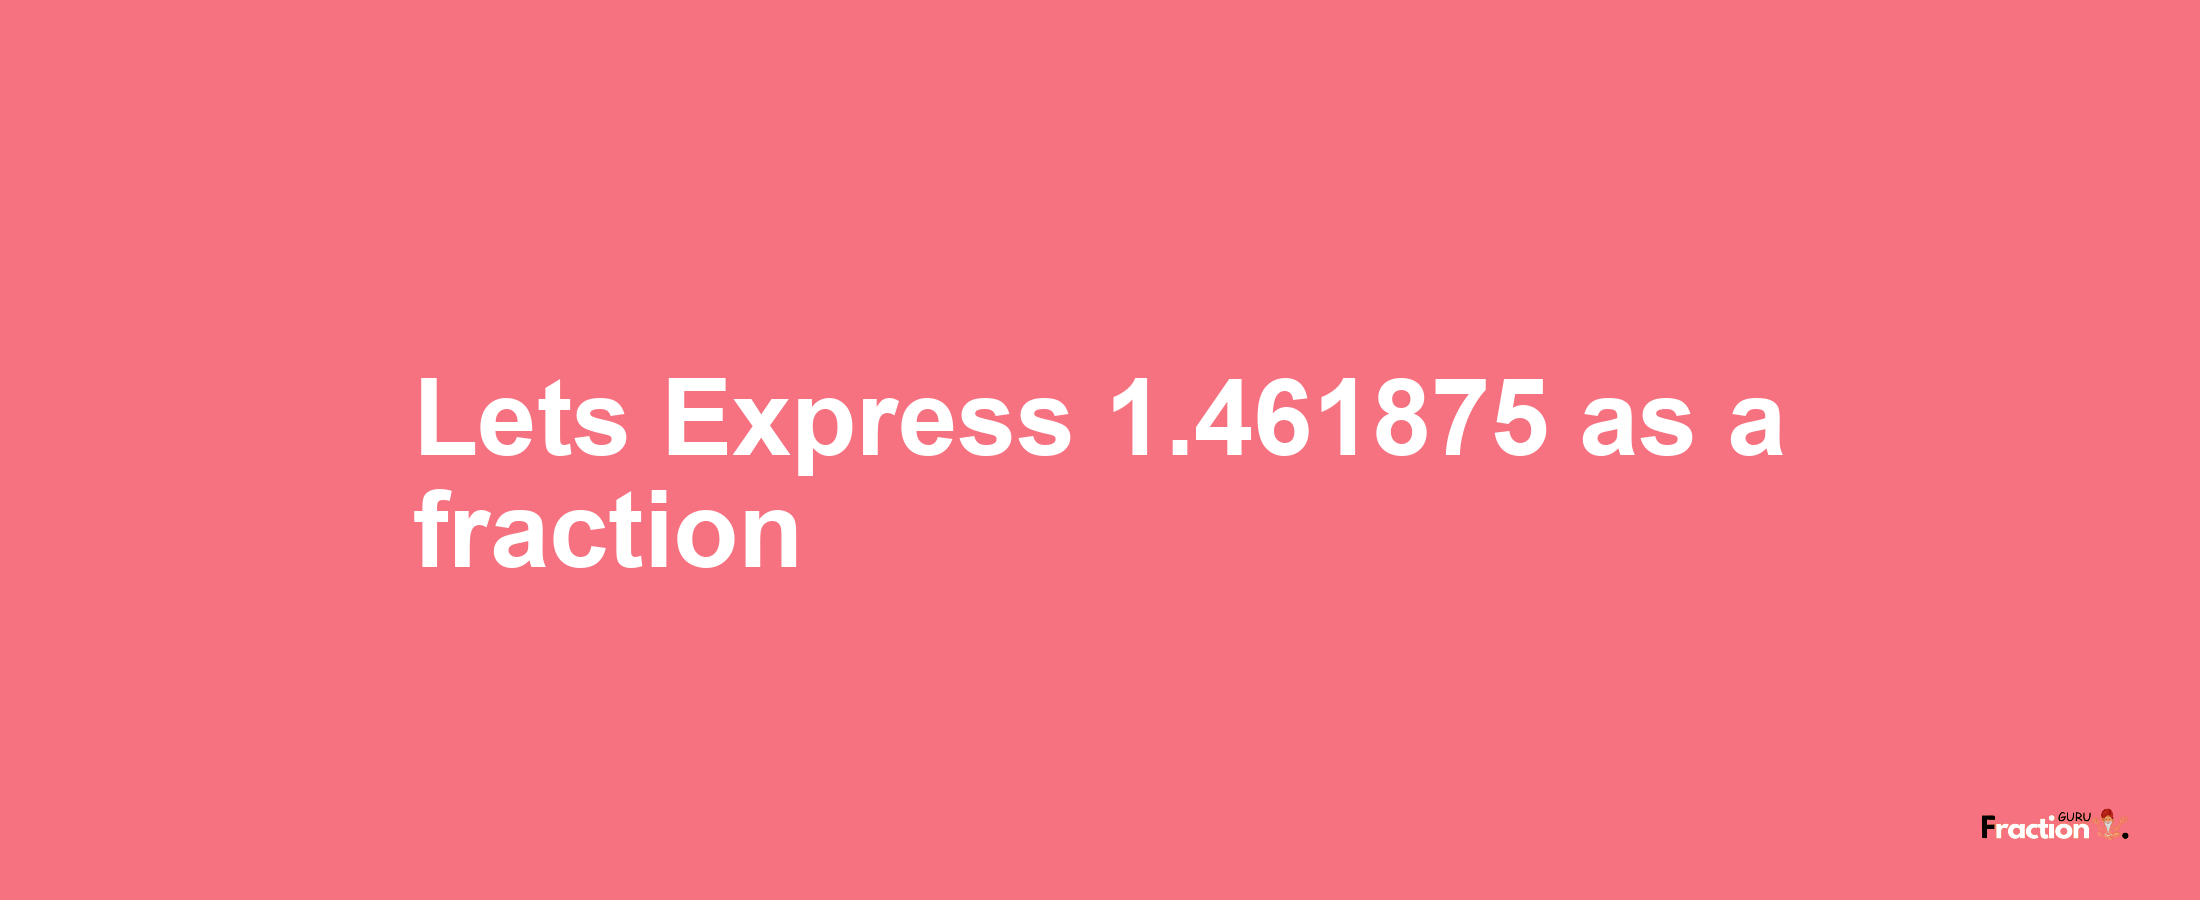 Lets Express 1.461875 as afraction